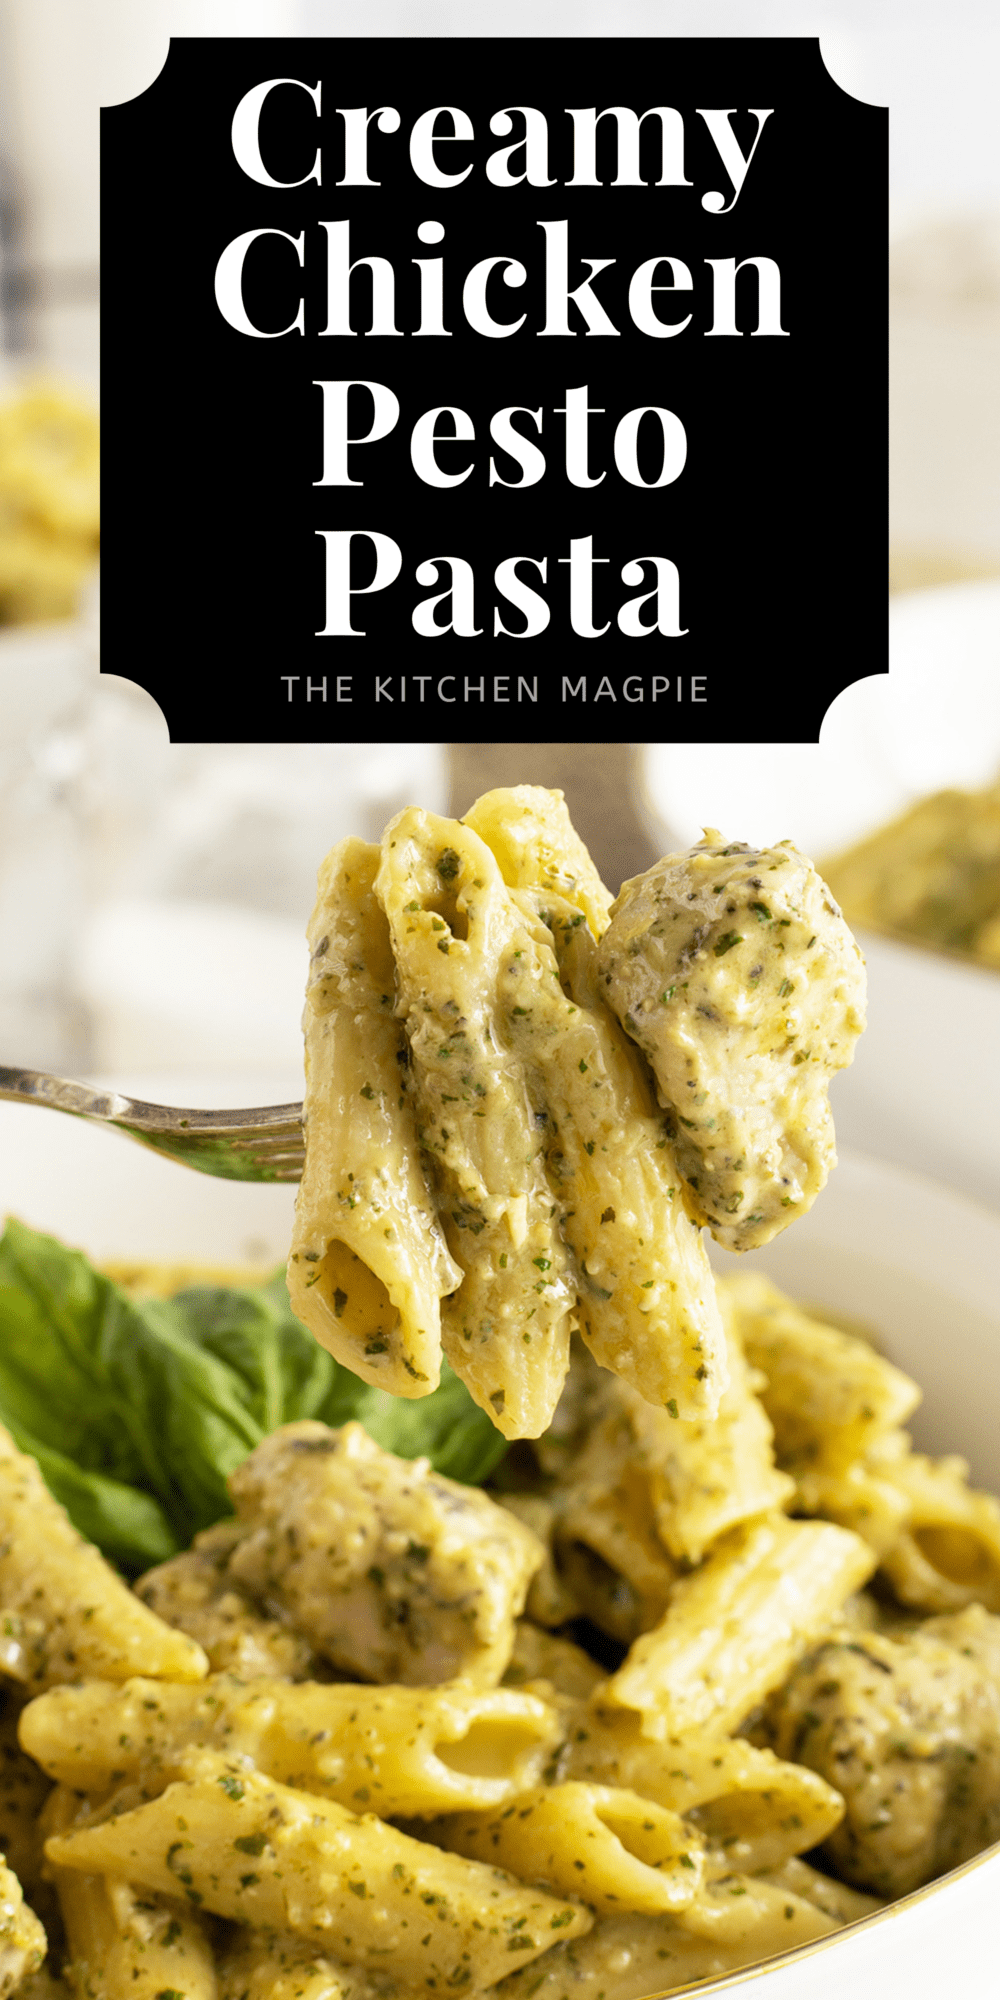 This decadent skillet creamy chicken pesto pasta is an easy to make comfort food that your whole family will love.